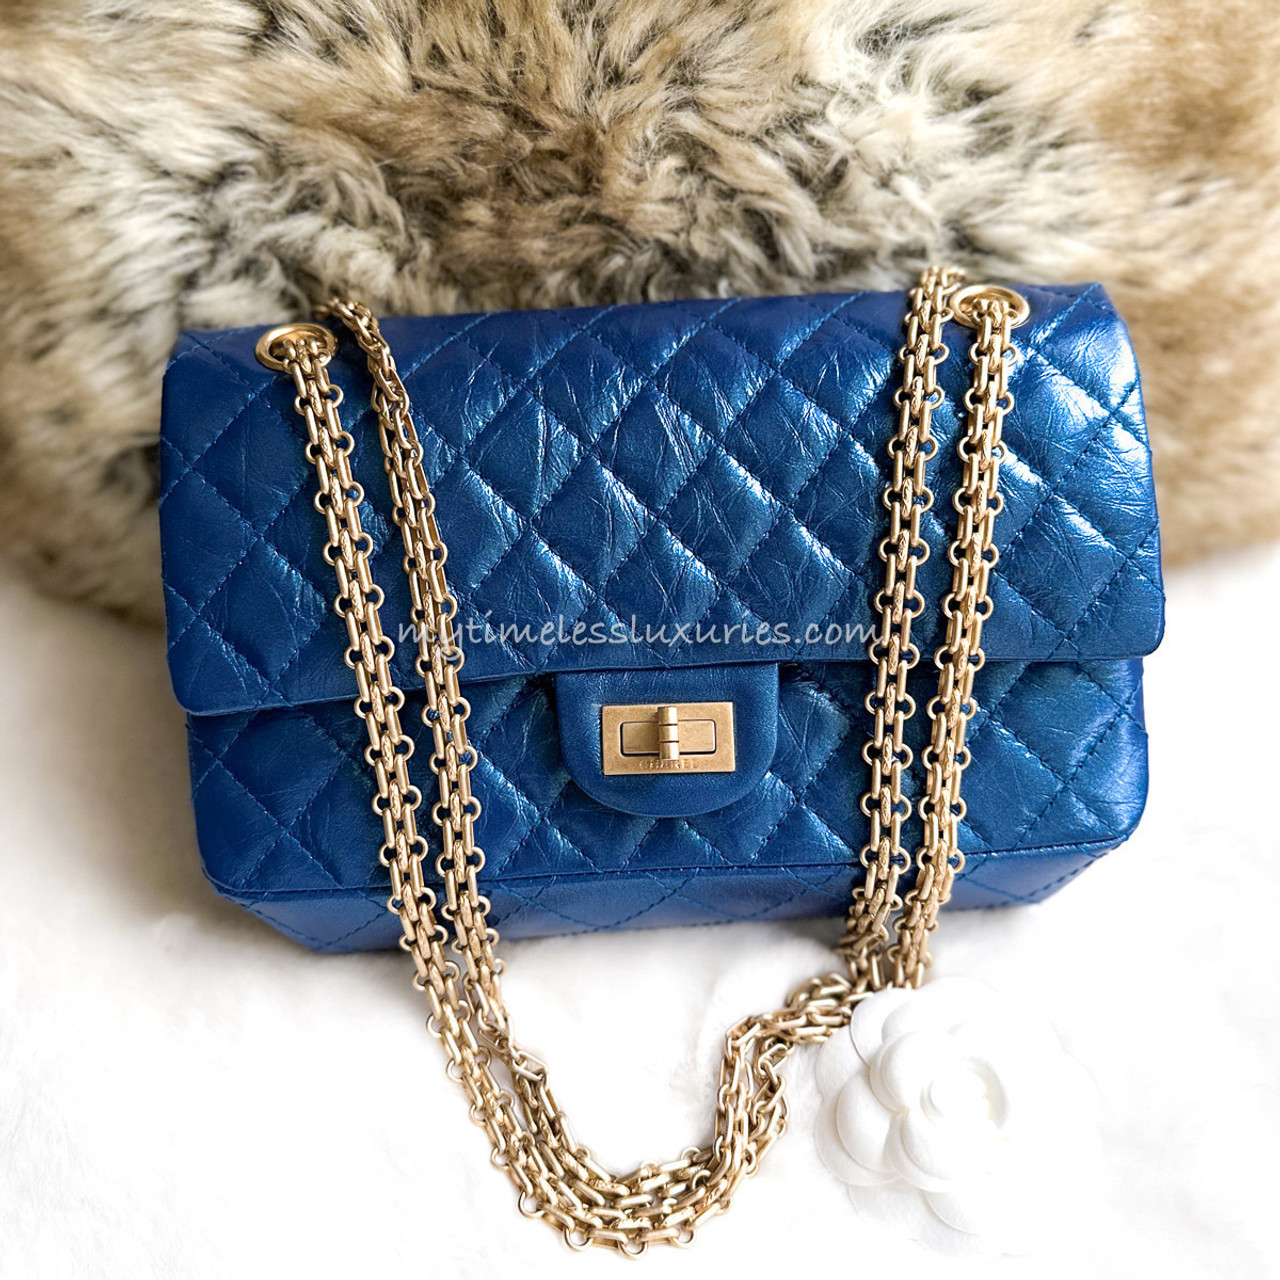 CHANEL 19A Iridescent Blue 2.55 Reissue 225 GHW *New - Timeless